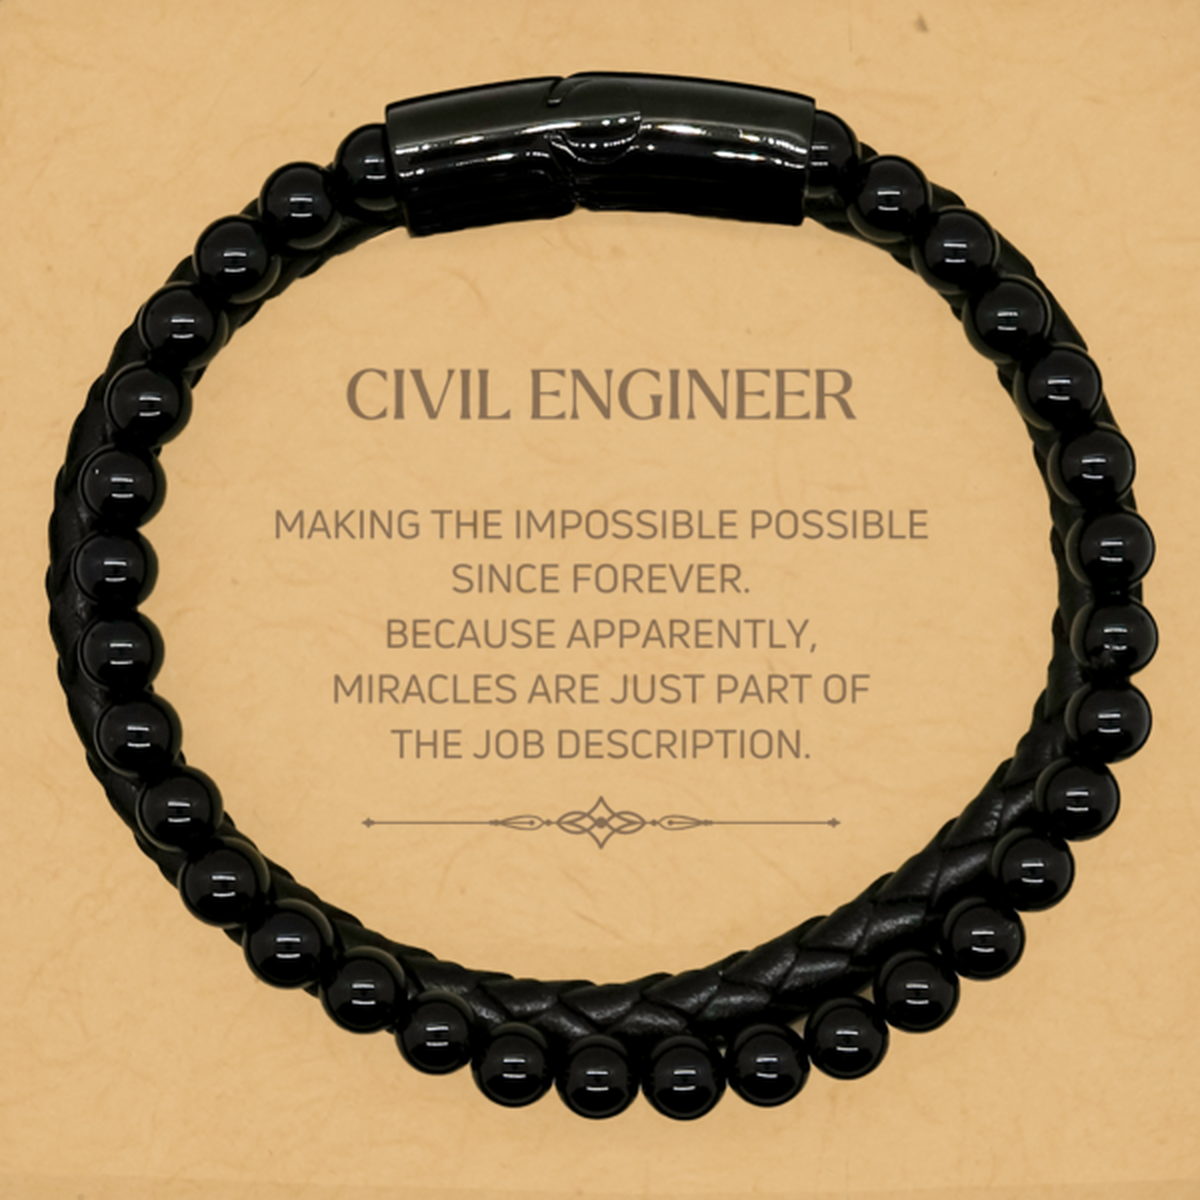 Funny Civil Engineer Gifts, Miracles are just part of the job description, Inspirational Birthday Stone Leather Bracelets For Civil Engineer, Men, Women, Coworkers, Friends, Boss